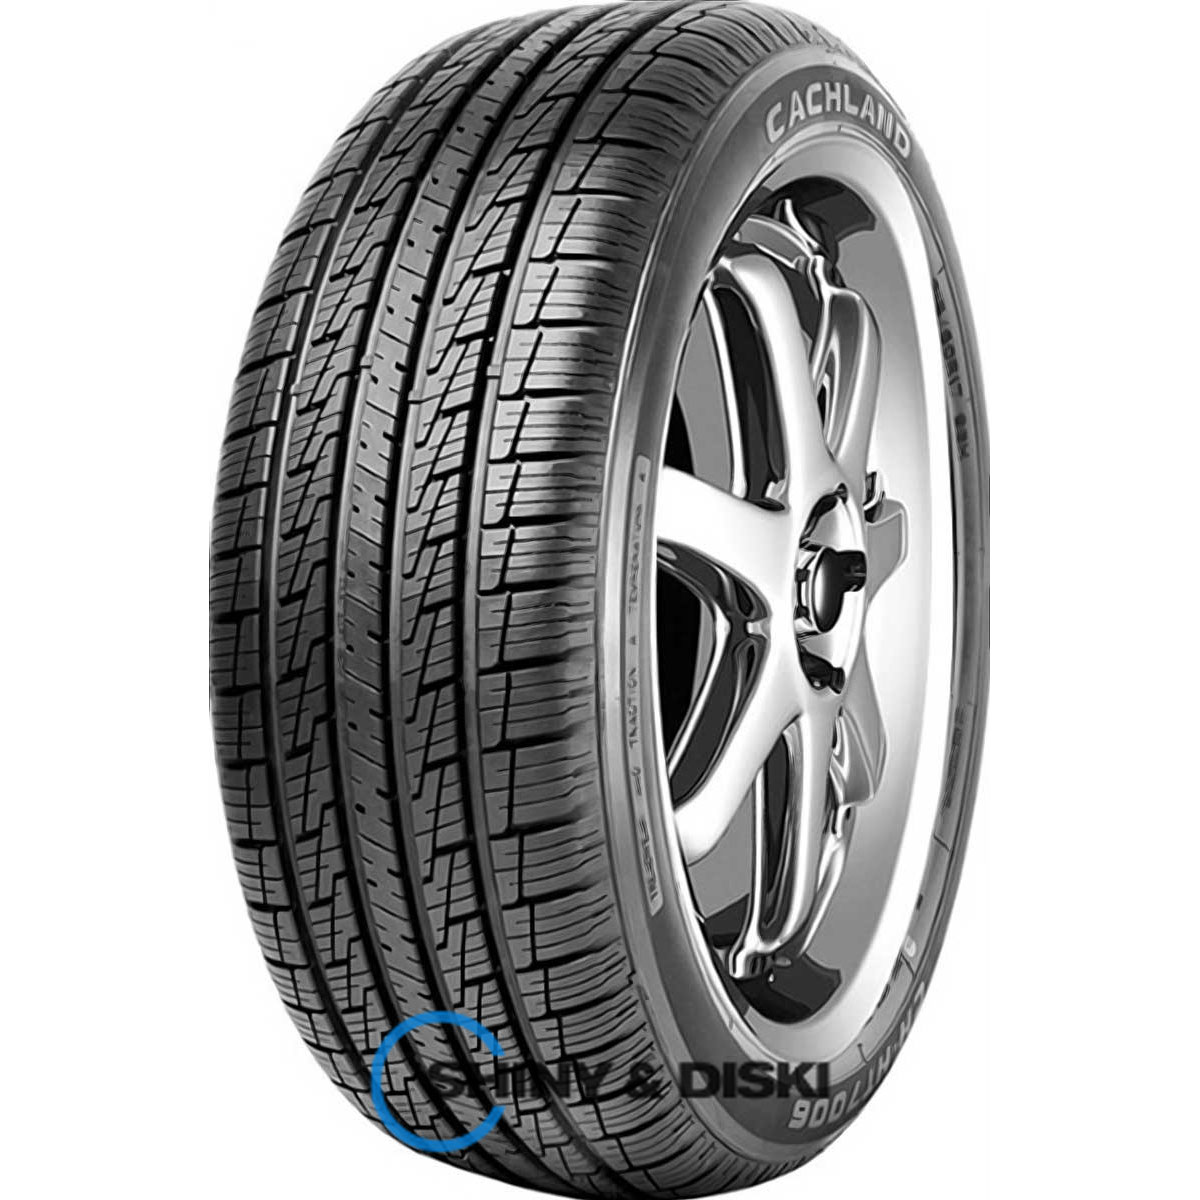 cachland ch-ht7006 225/60 r17 99h